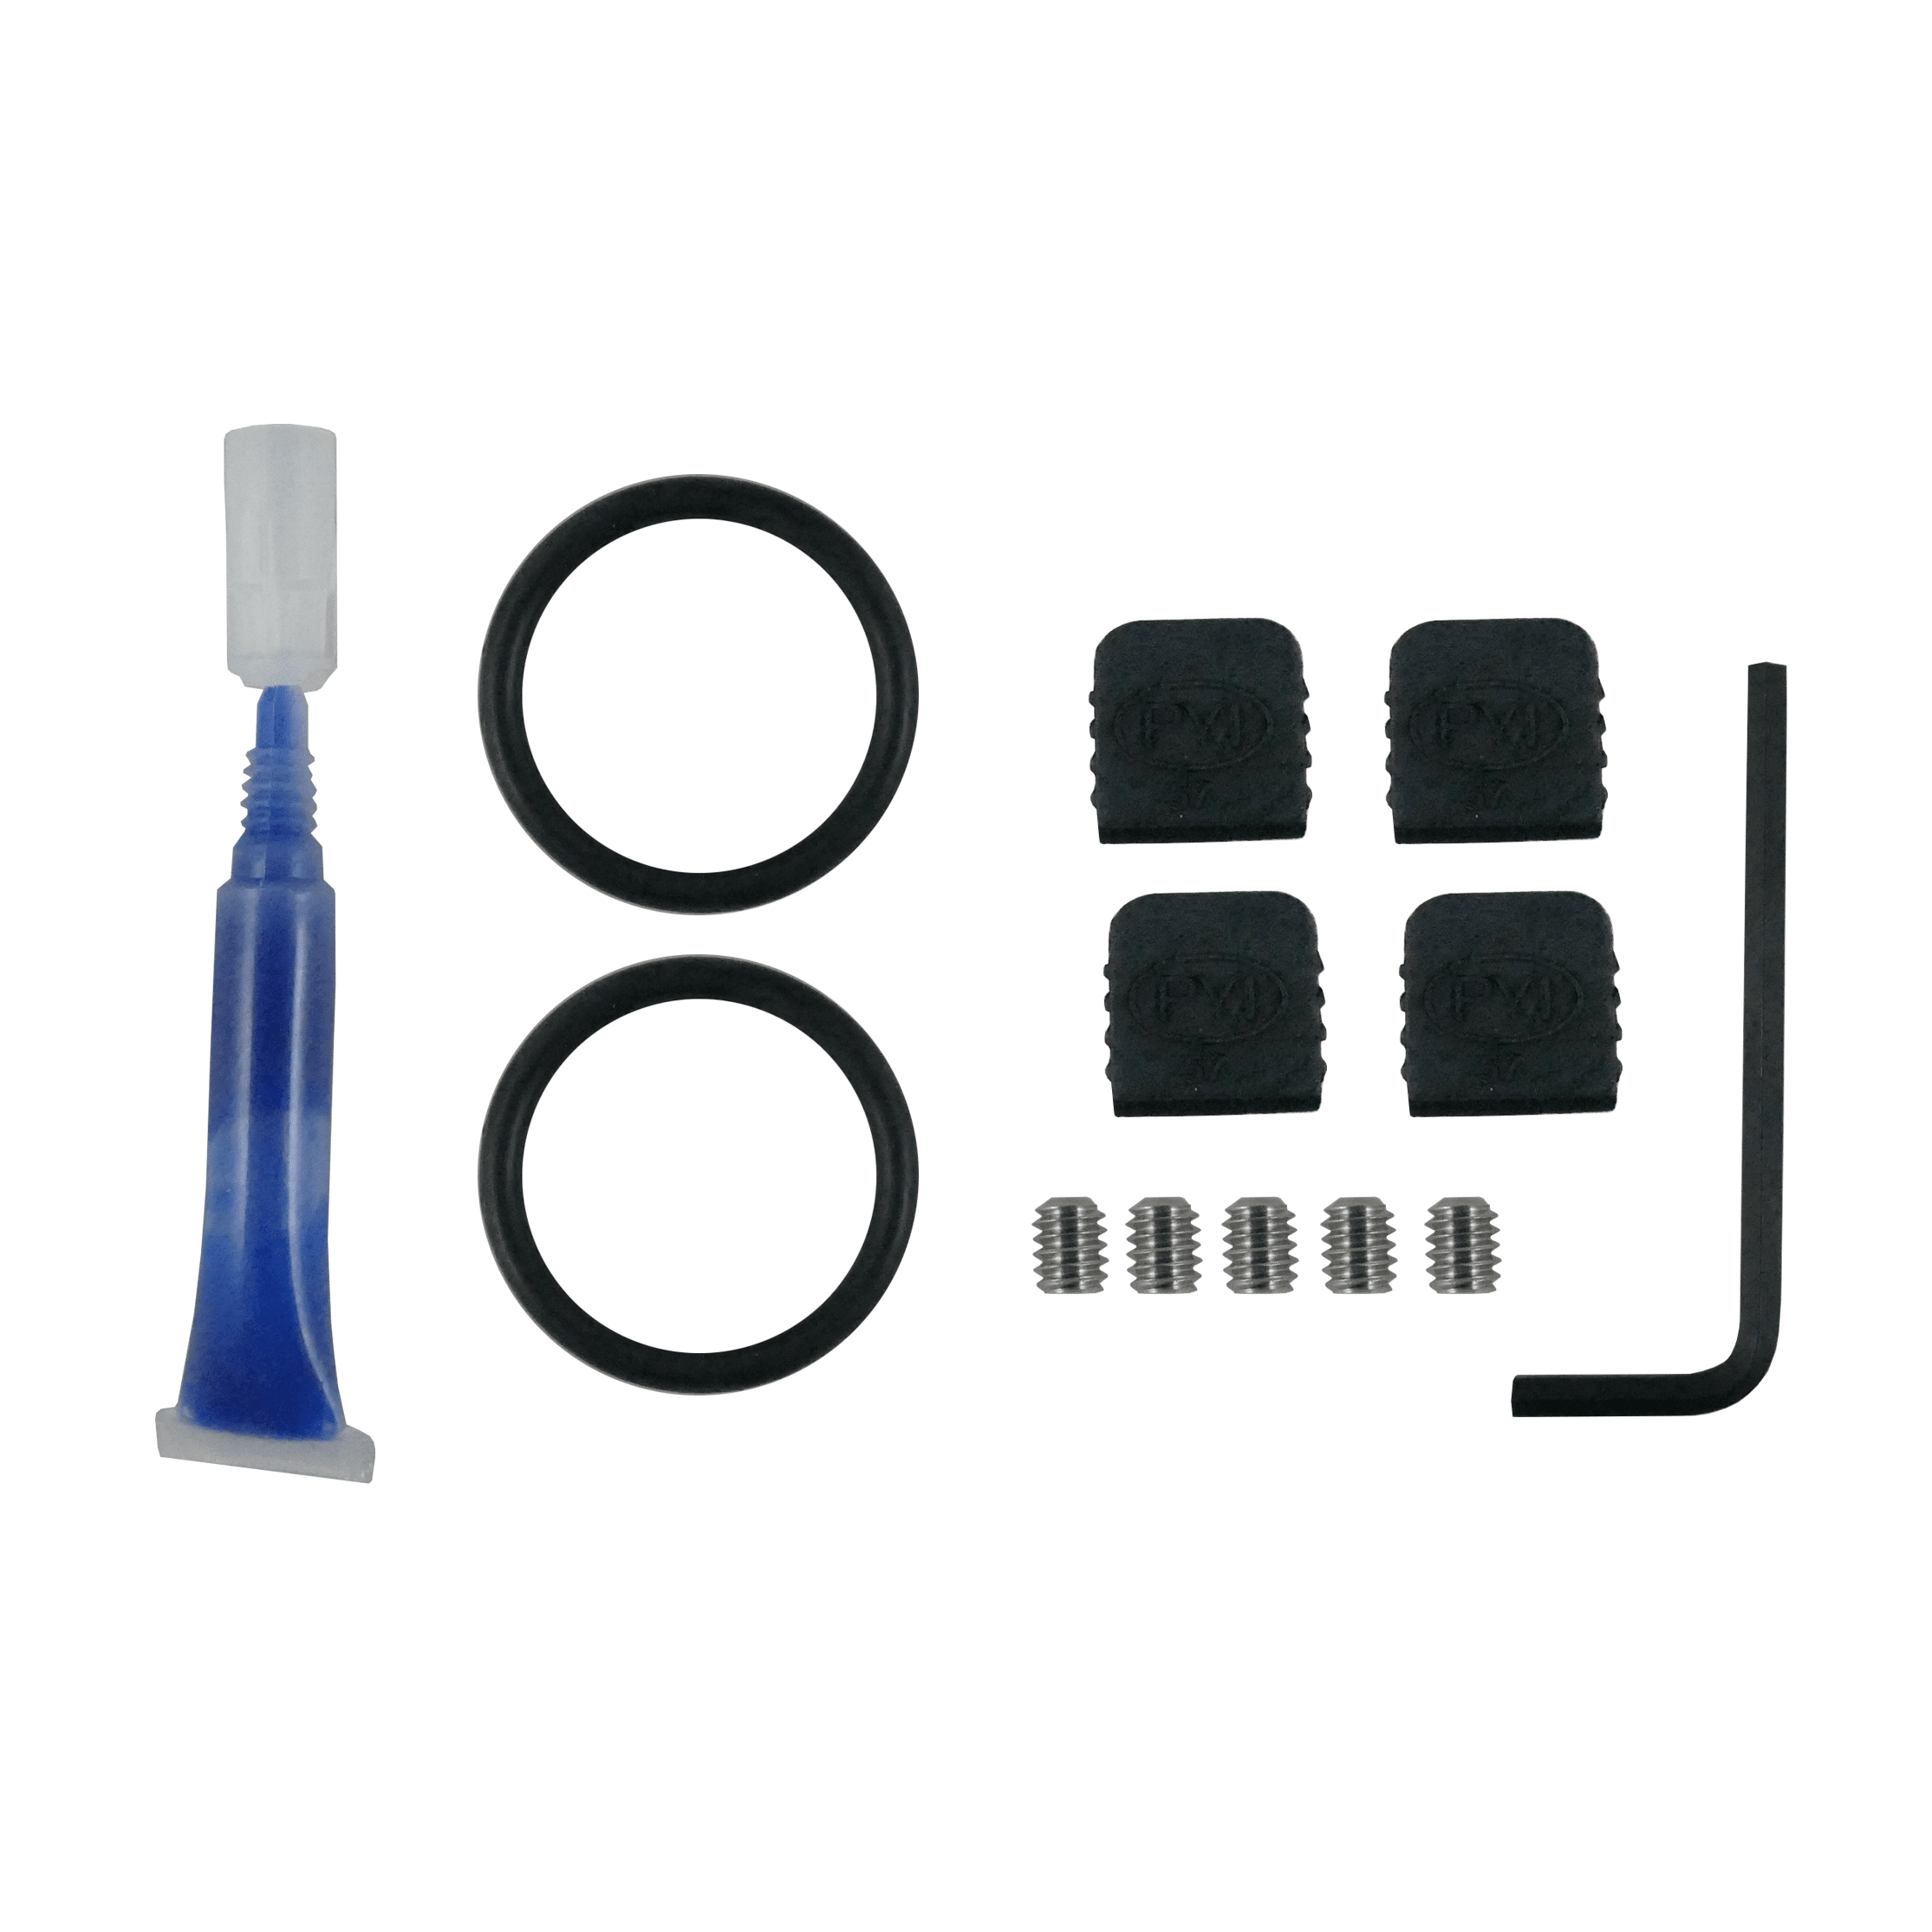 07-n-11-8 of PSS Shaft Seals O-Ring Pack and Screw Set